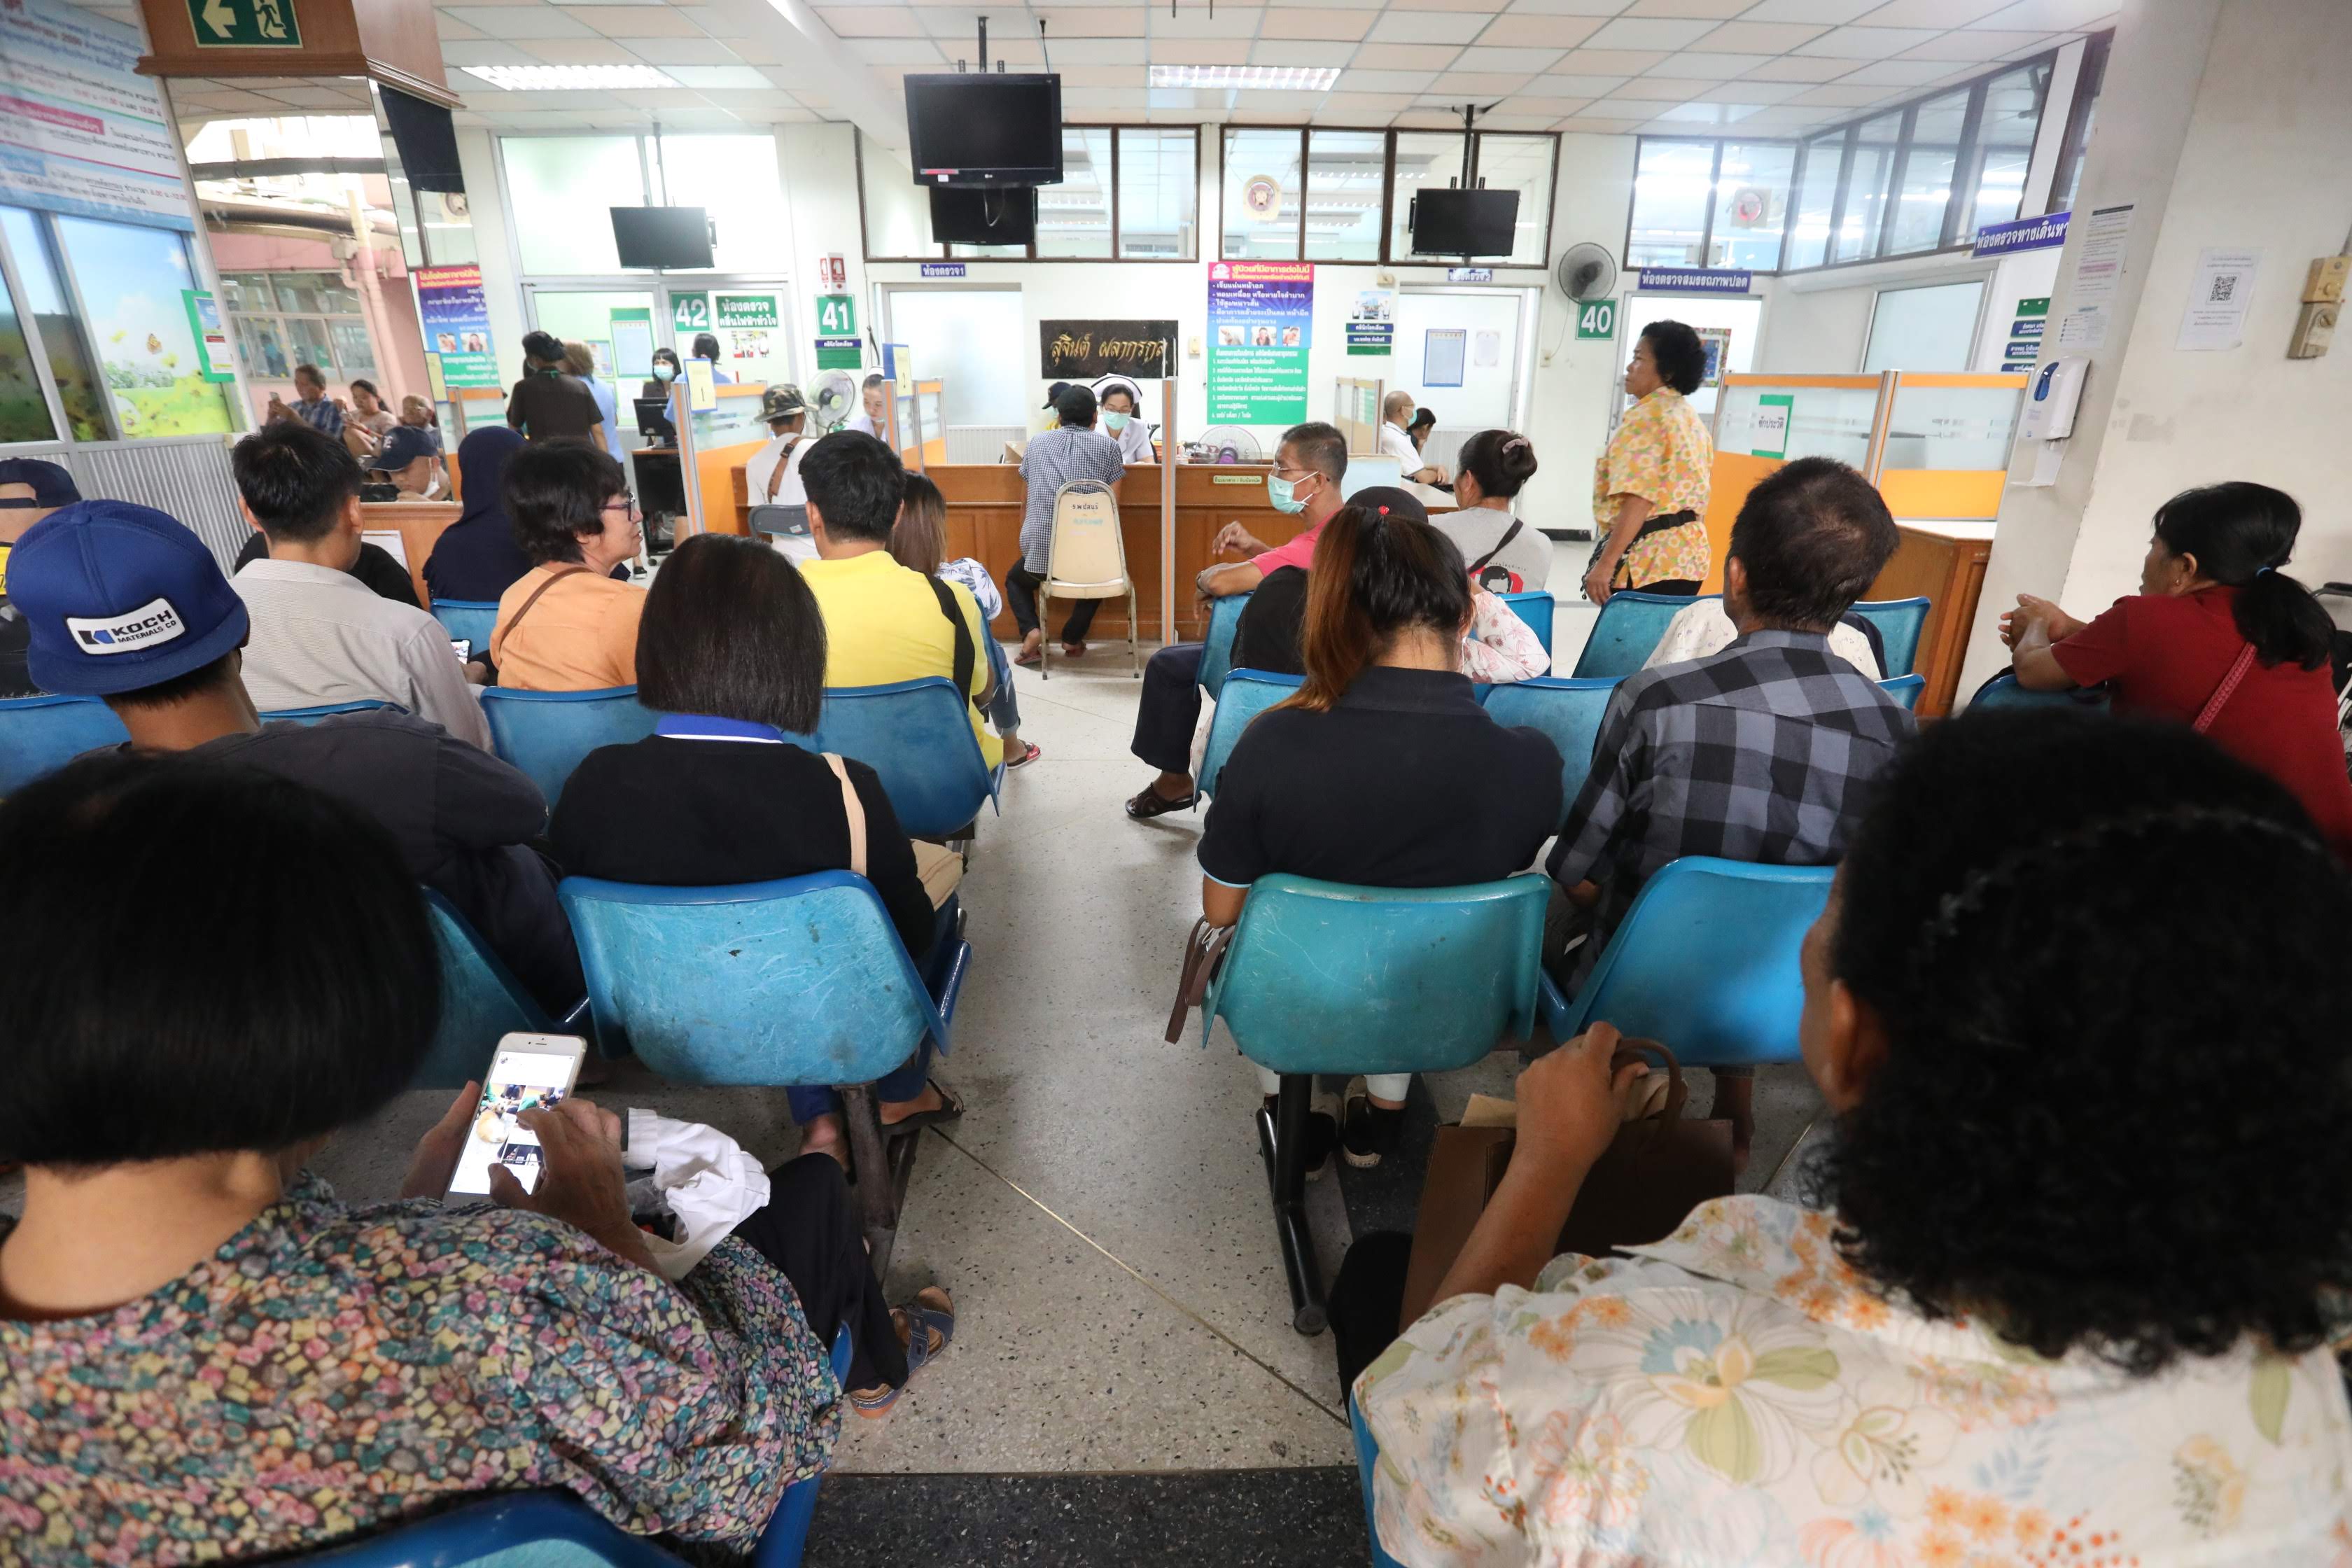 As COVID-19 remains a major health threat in Thailand, the National Health Security Office (NHSO) has committed to financially supporting the country’s healthcare system to cope better with the corona